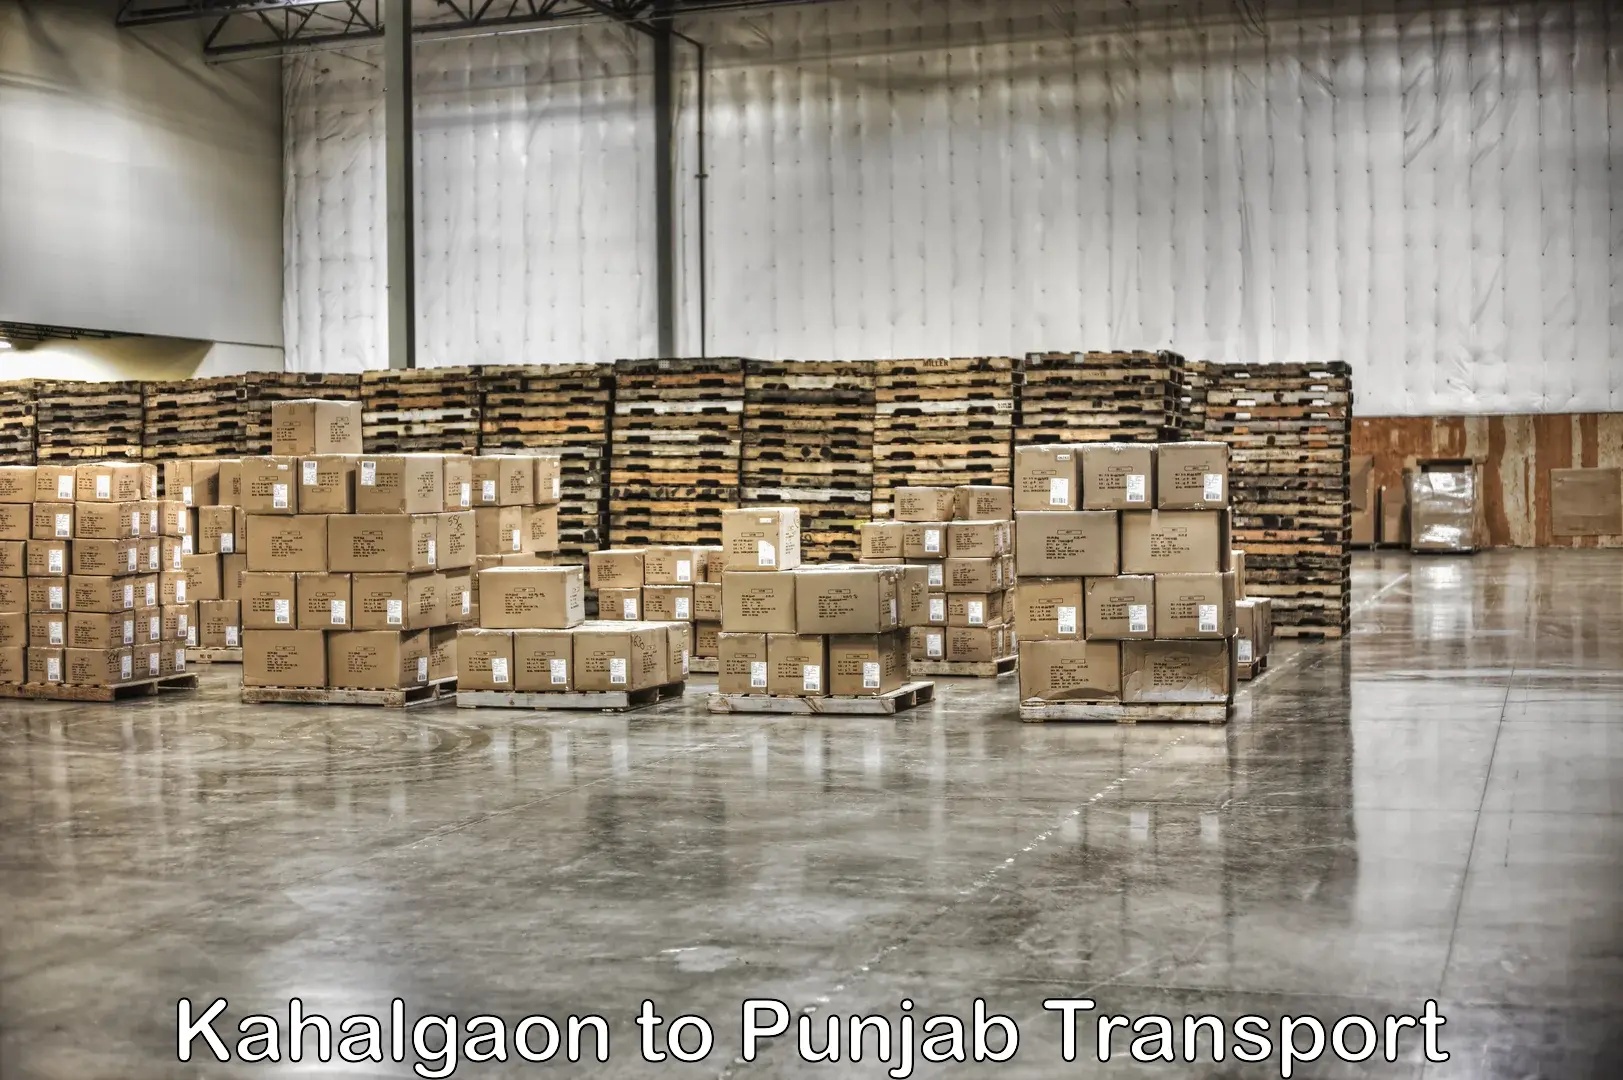 Air freight transport services Kahalgaon to Mehta Chowk